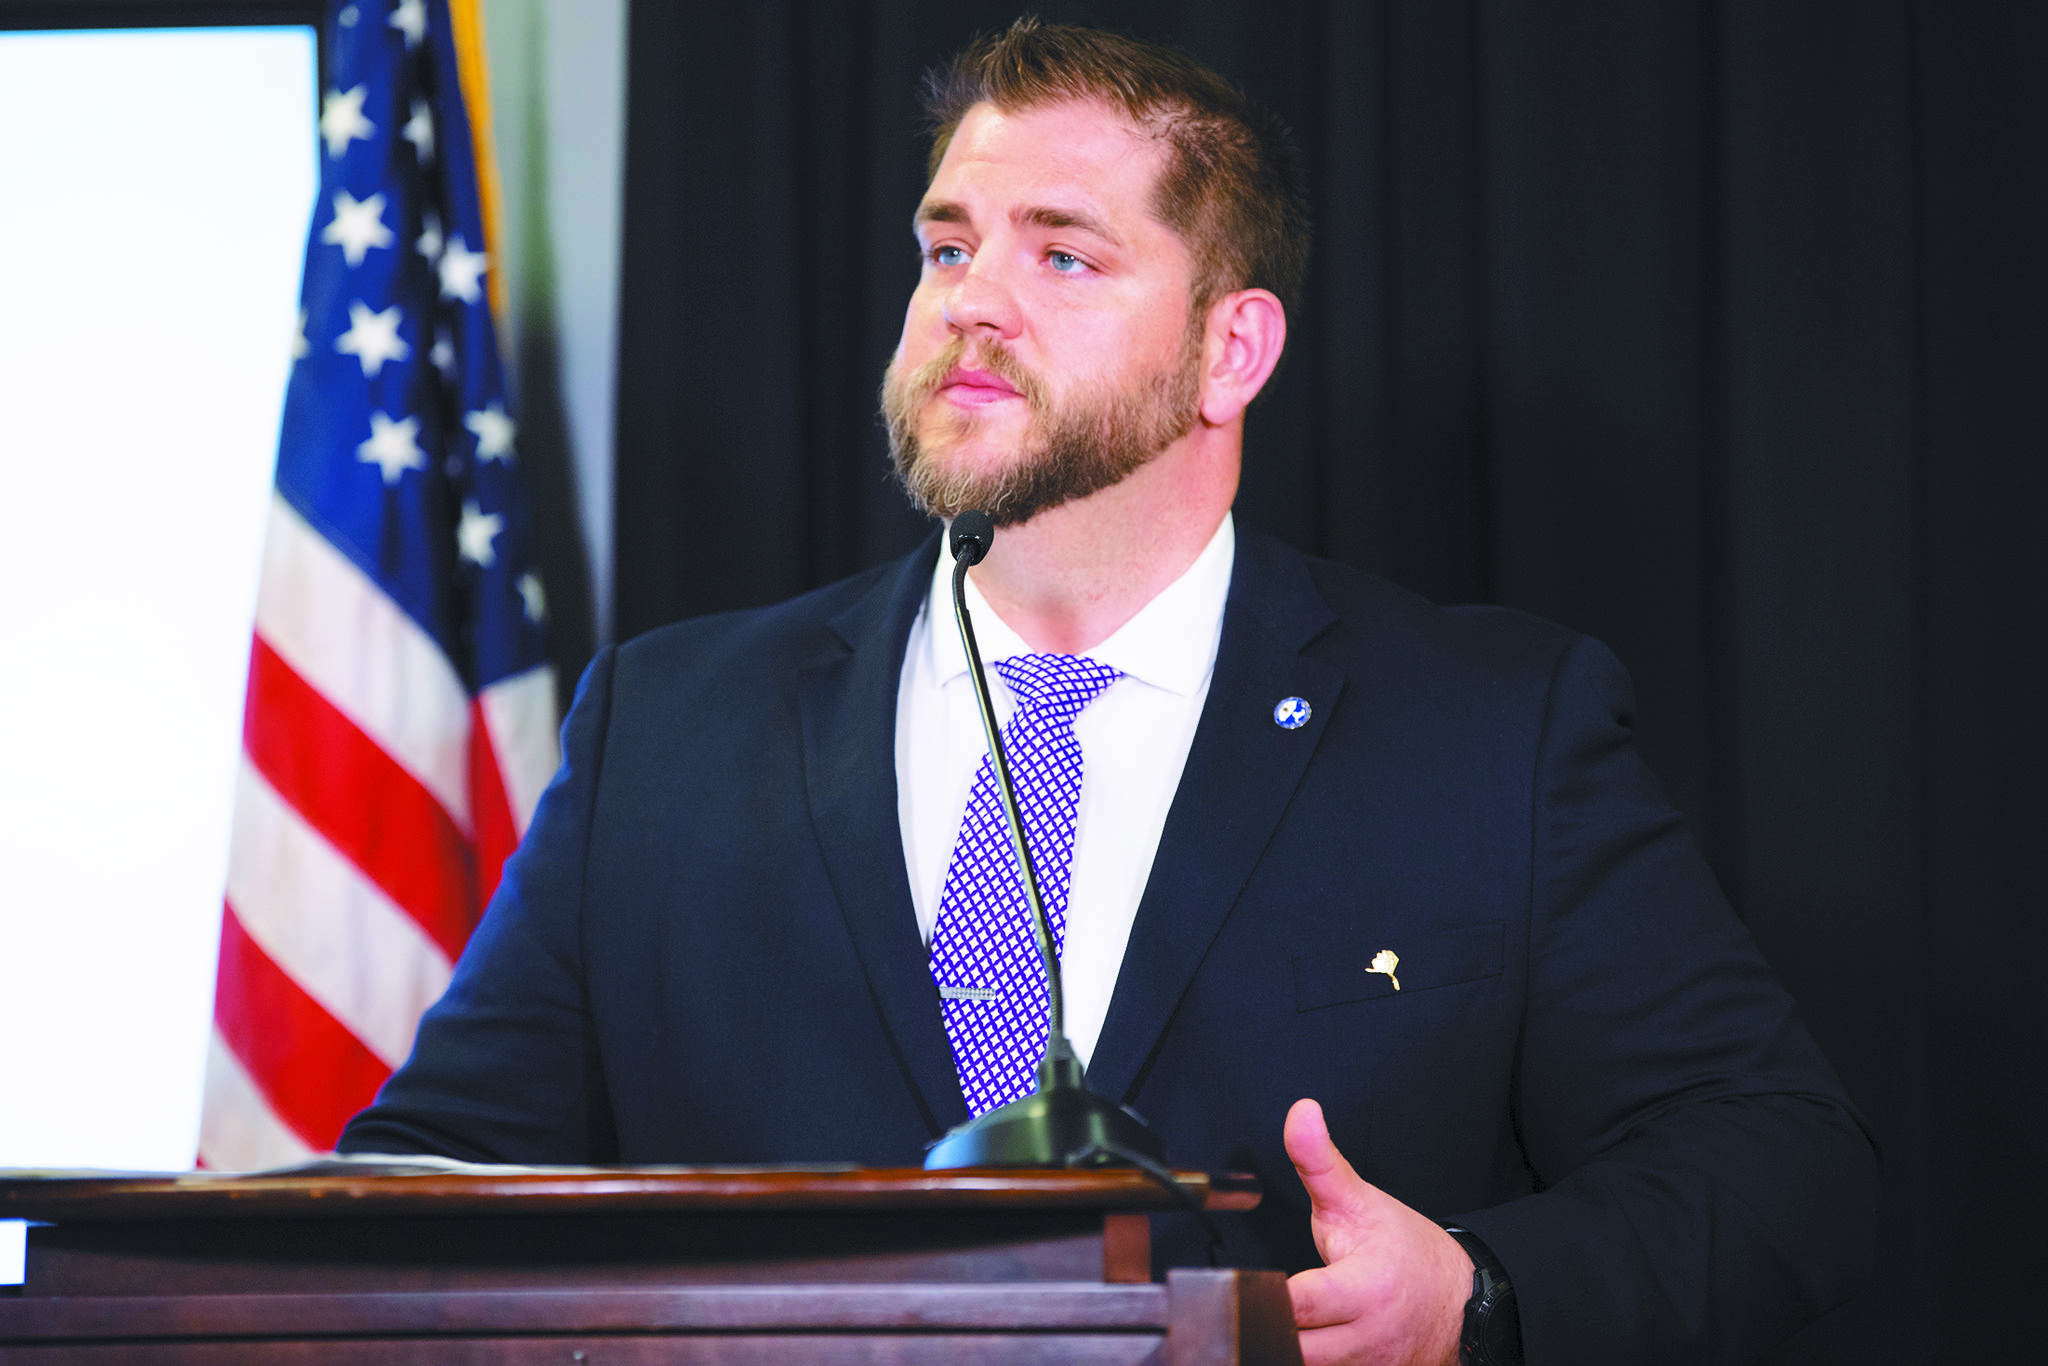 Alaska Department of Health and Social Services Commissioner Adam Crum speaks during a Tuesday, April 7, 2020 press conference in the Atwood Building in Anchorage, Alaska. (Photo courtesy Office of the Governor)